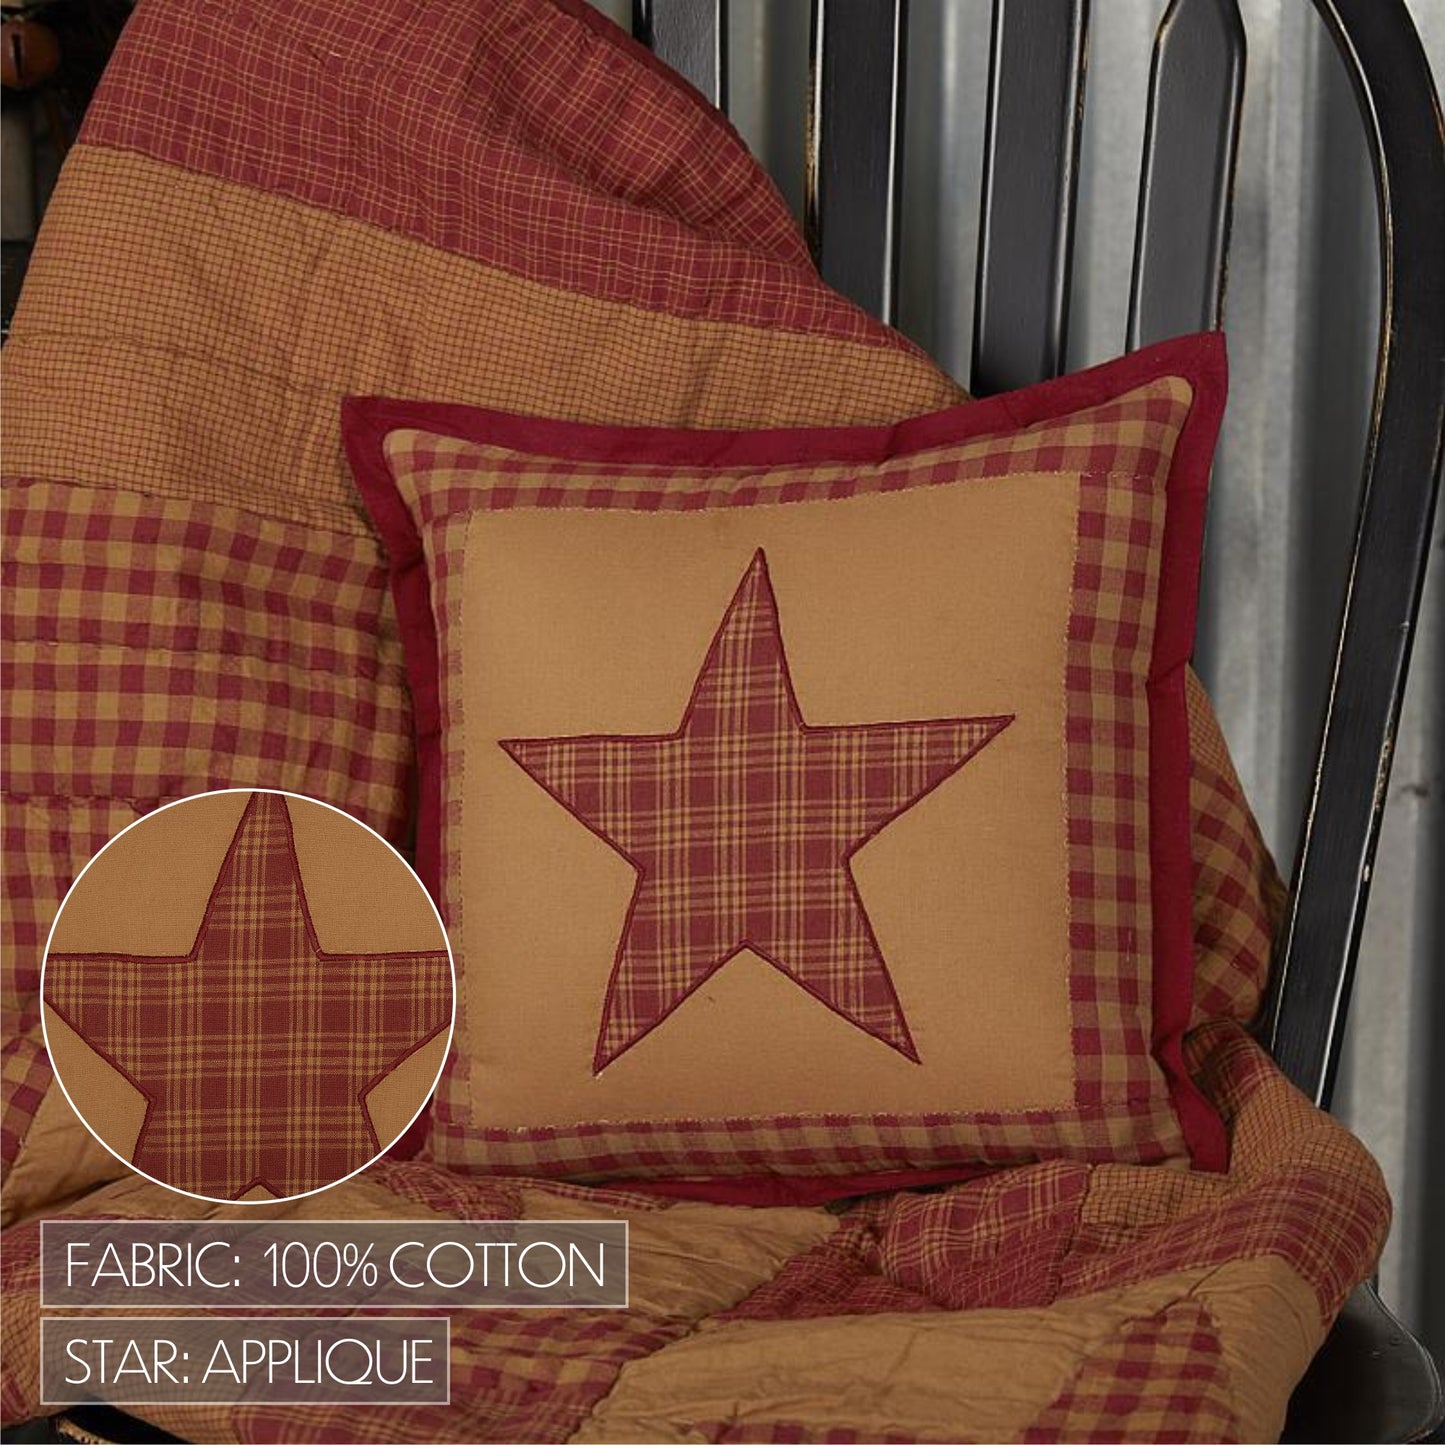 56742-Ninepatch-Star-Quilted-Pillow-12x12-image-2